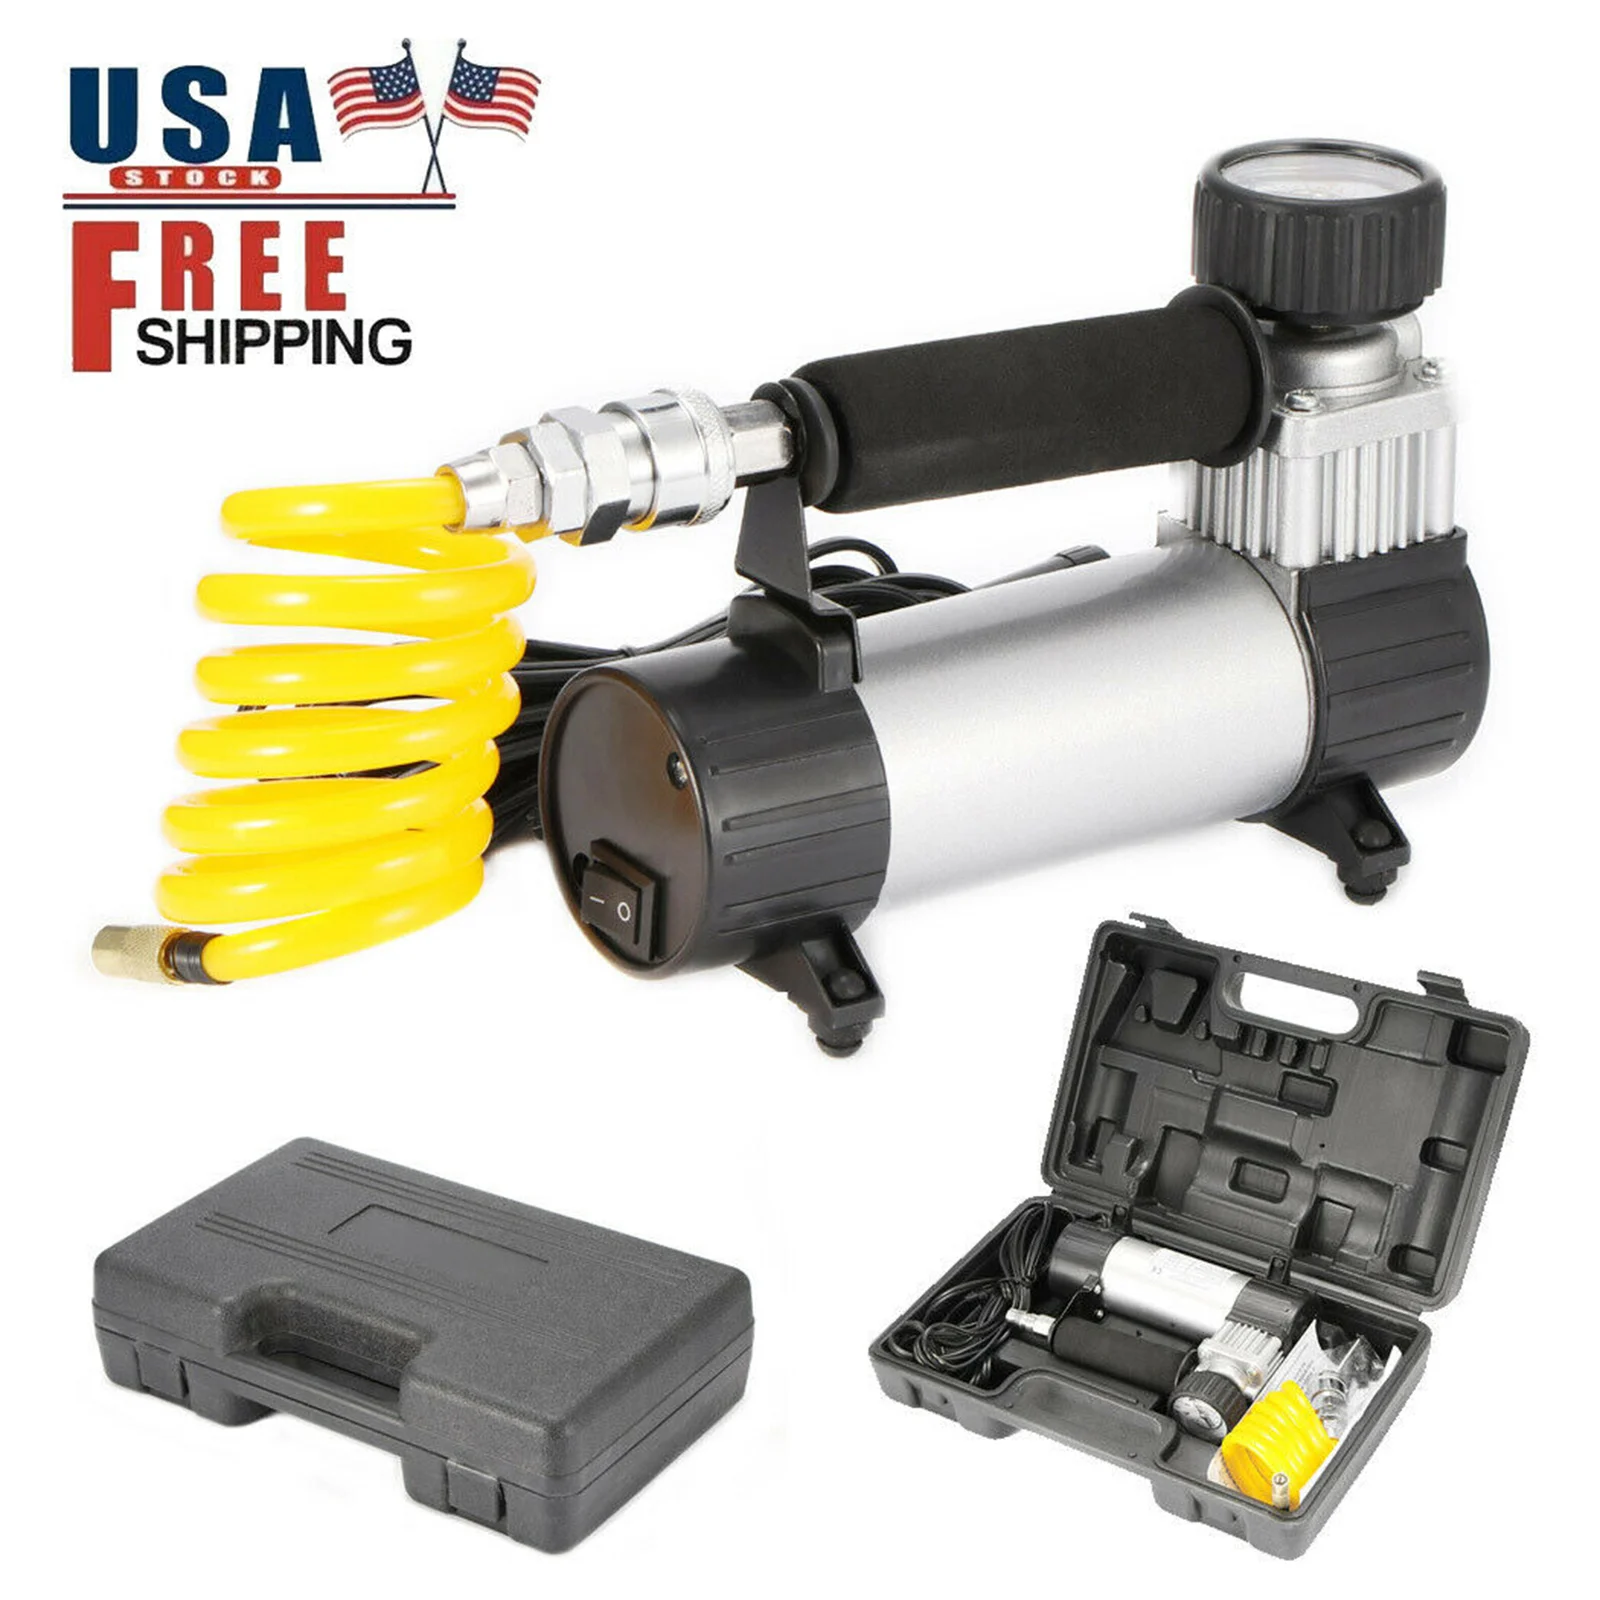 Compact Car Tyre Air Compressor Pump 12V DC 100PSI Bicycle Tire Inflator